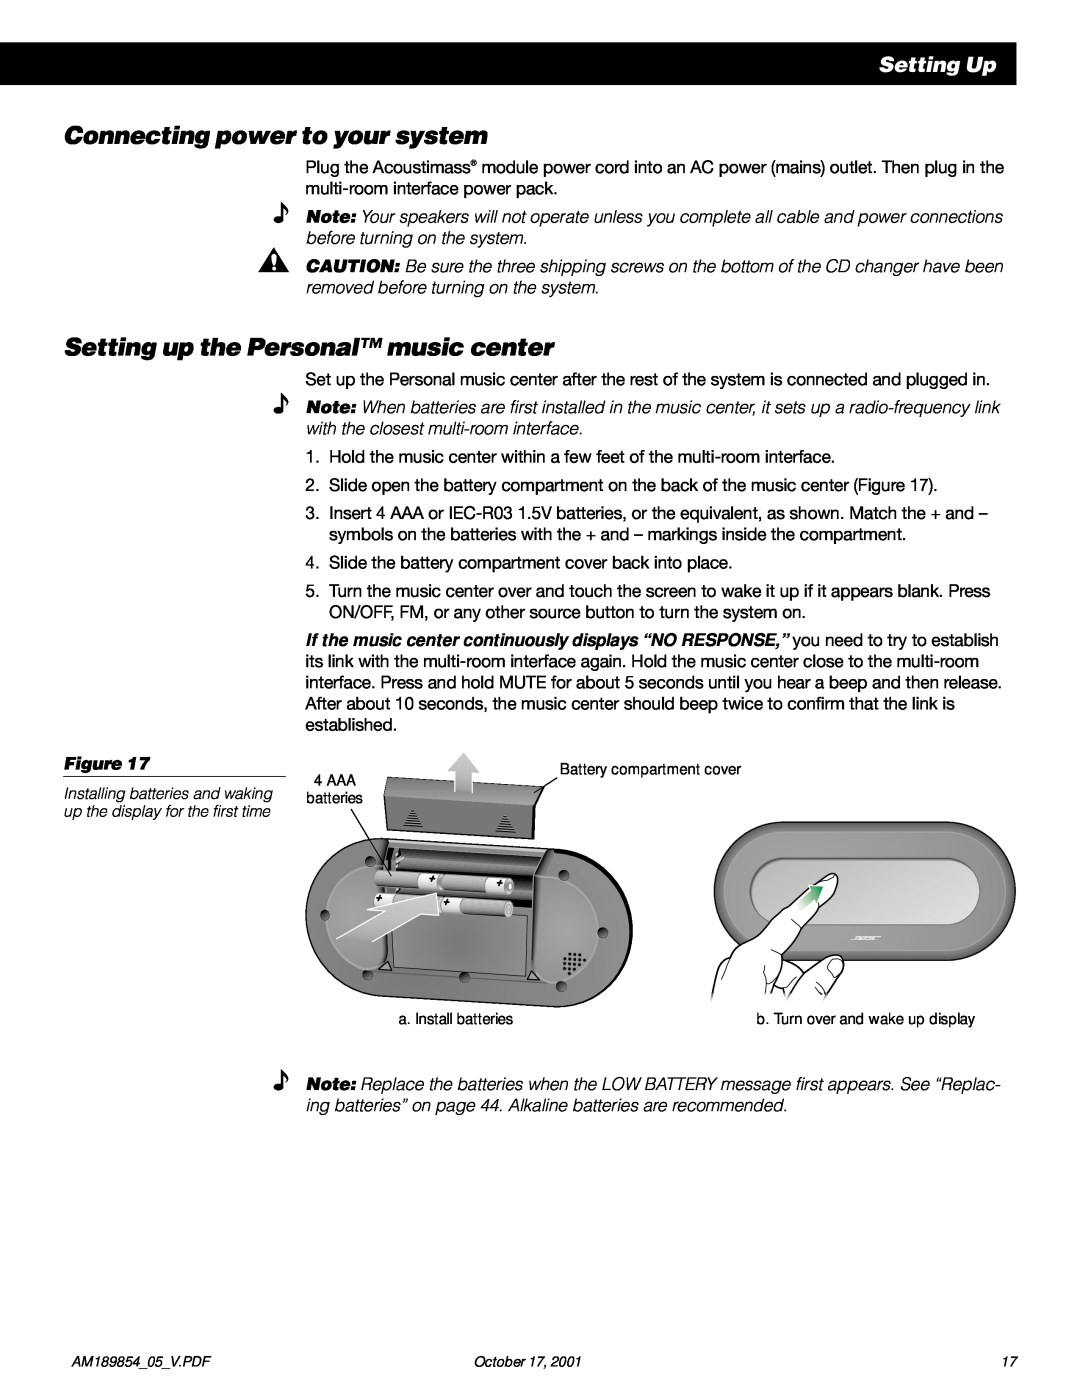 Bose 50 Connecting power to your system, Setting up the Personal music center, Setting Up, 4 AAA, a. Install batteries 